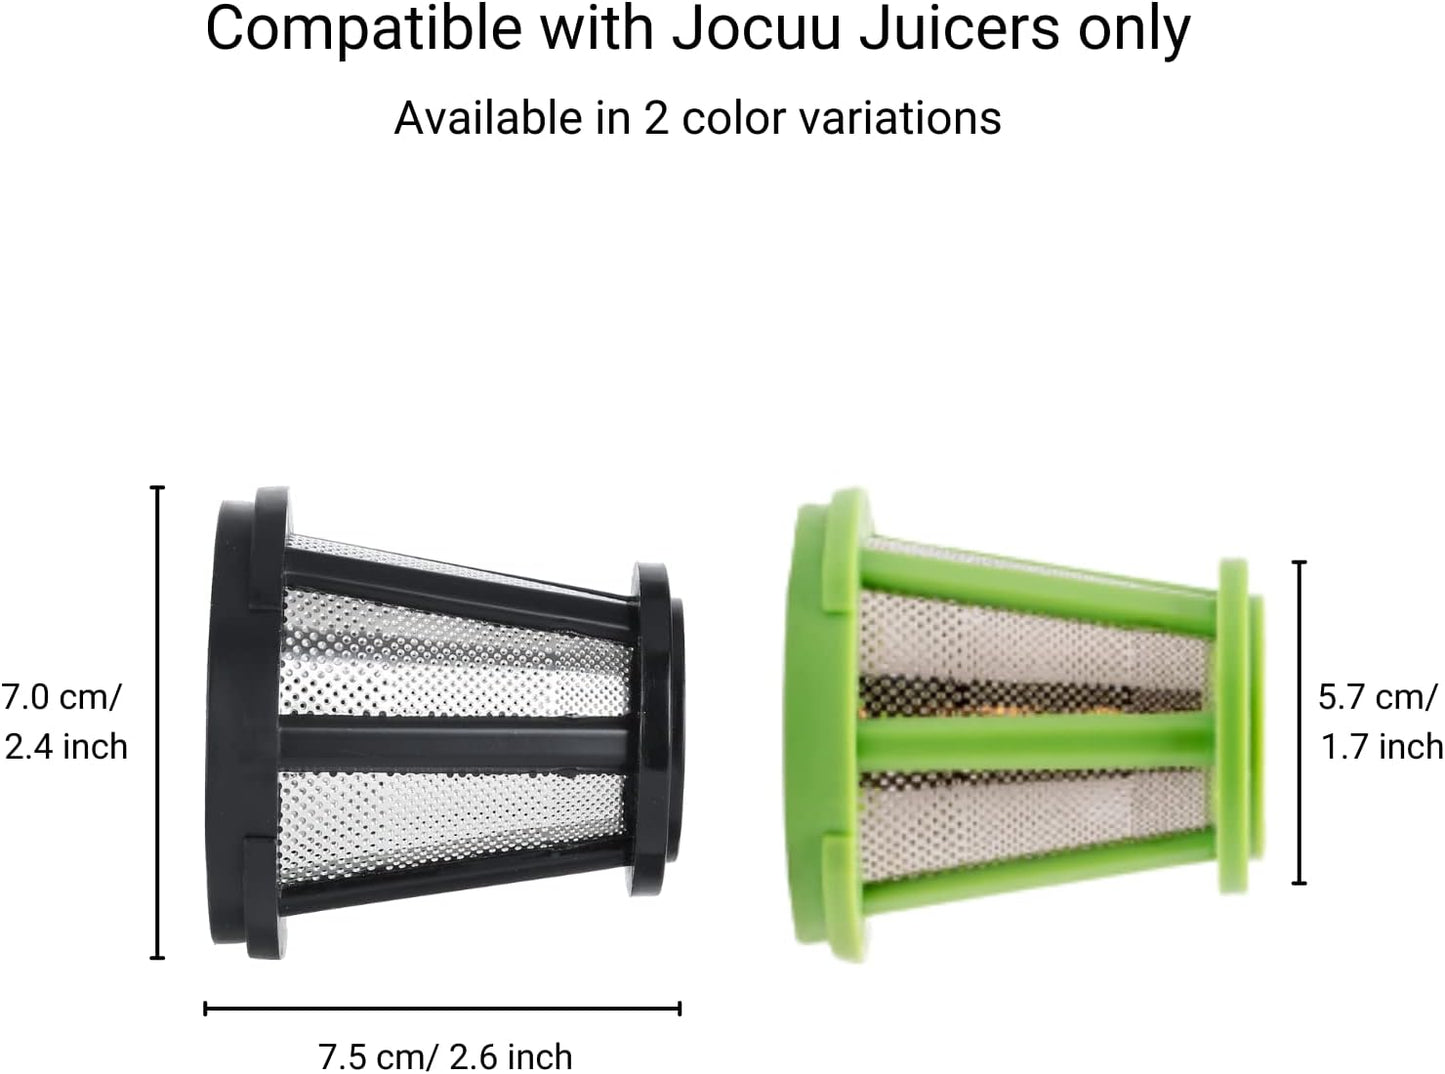 Jocuu Accessory No. 7 Juicer Strainer, Filter, Replacement Part for Slow Masticating Juicer ZM1503